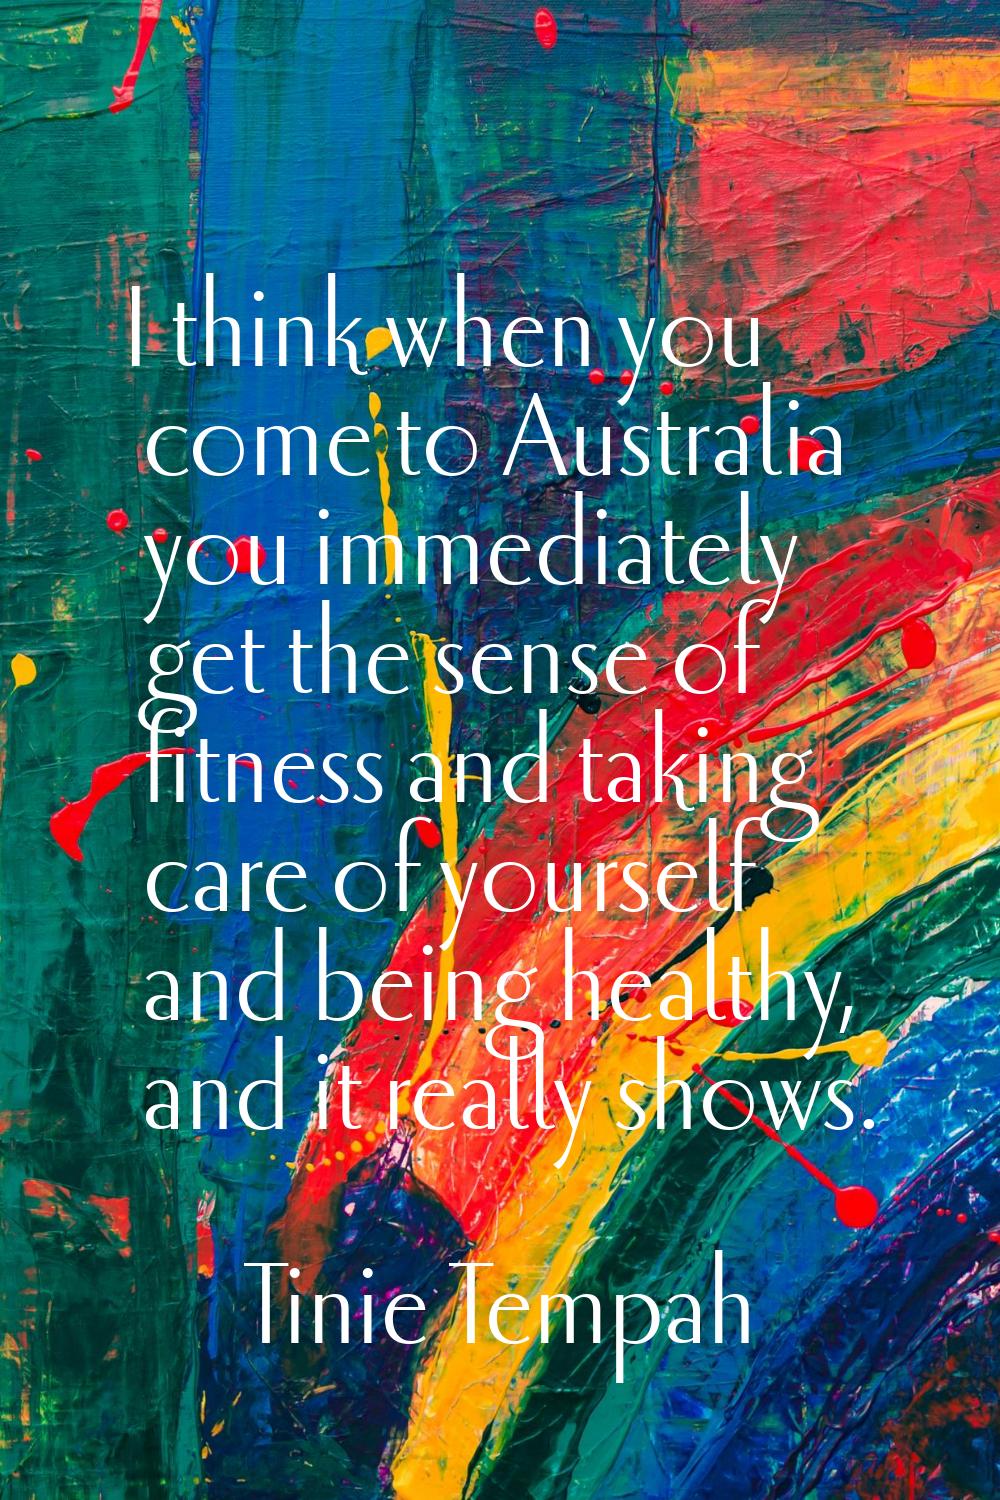 I think when you come to Australia you immediately get the sense of fitness and taking care of your